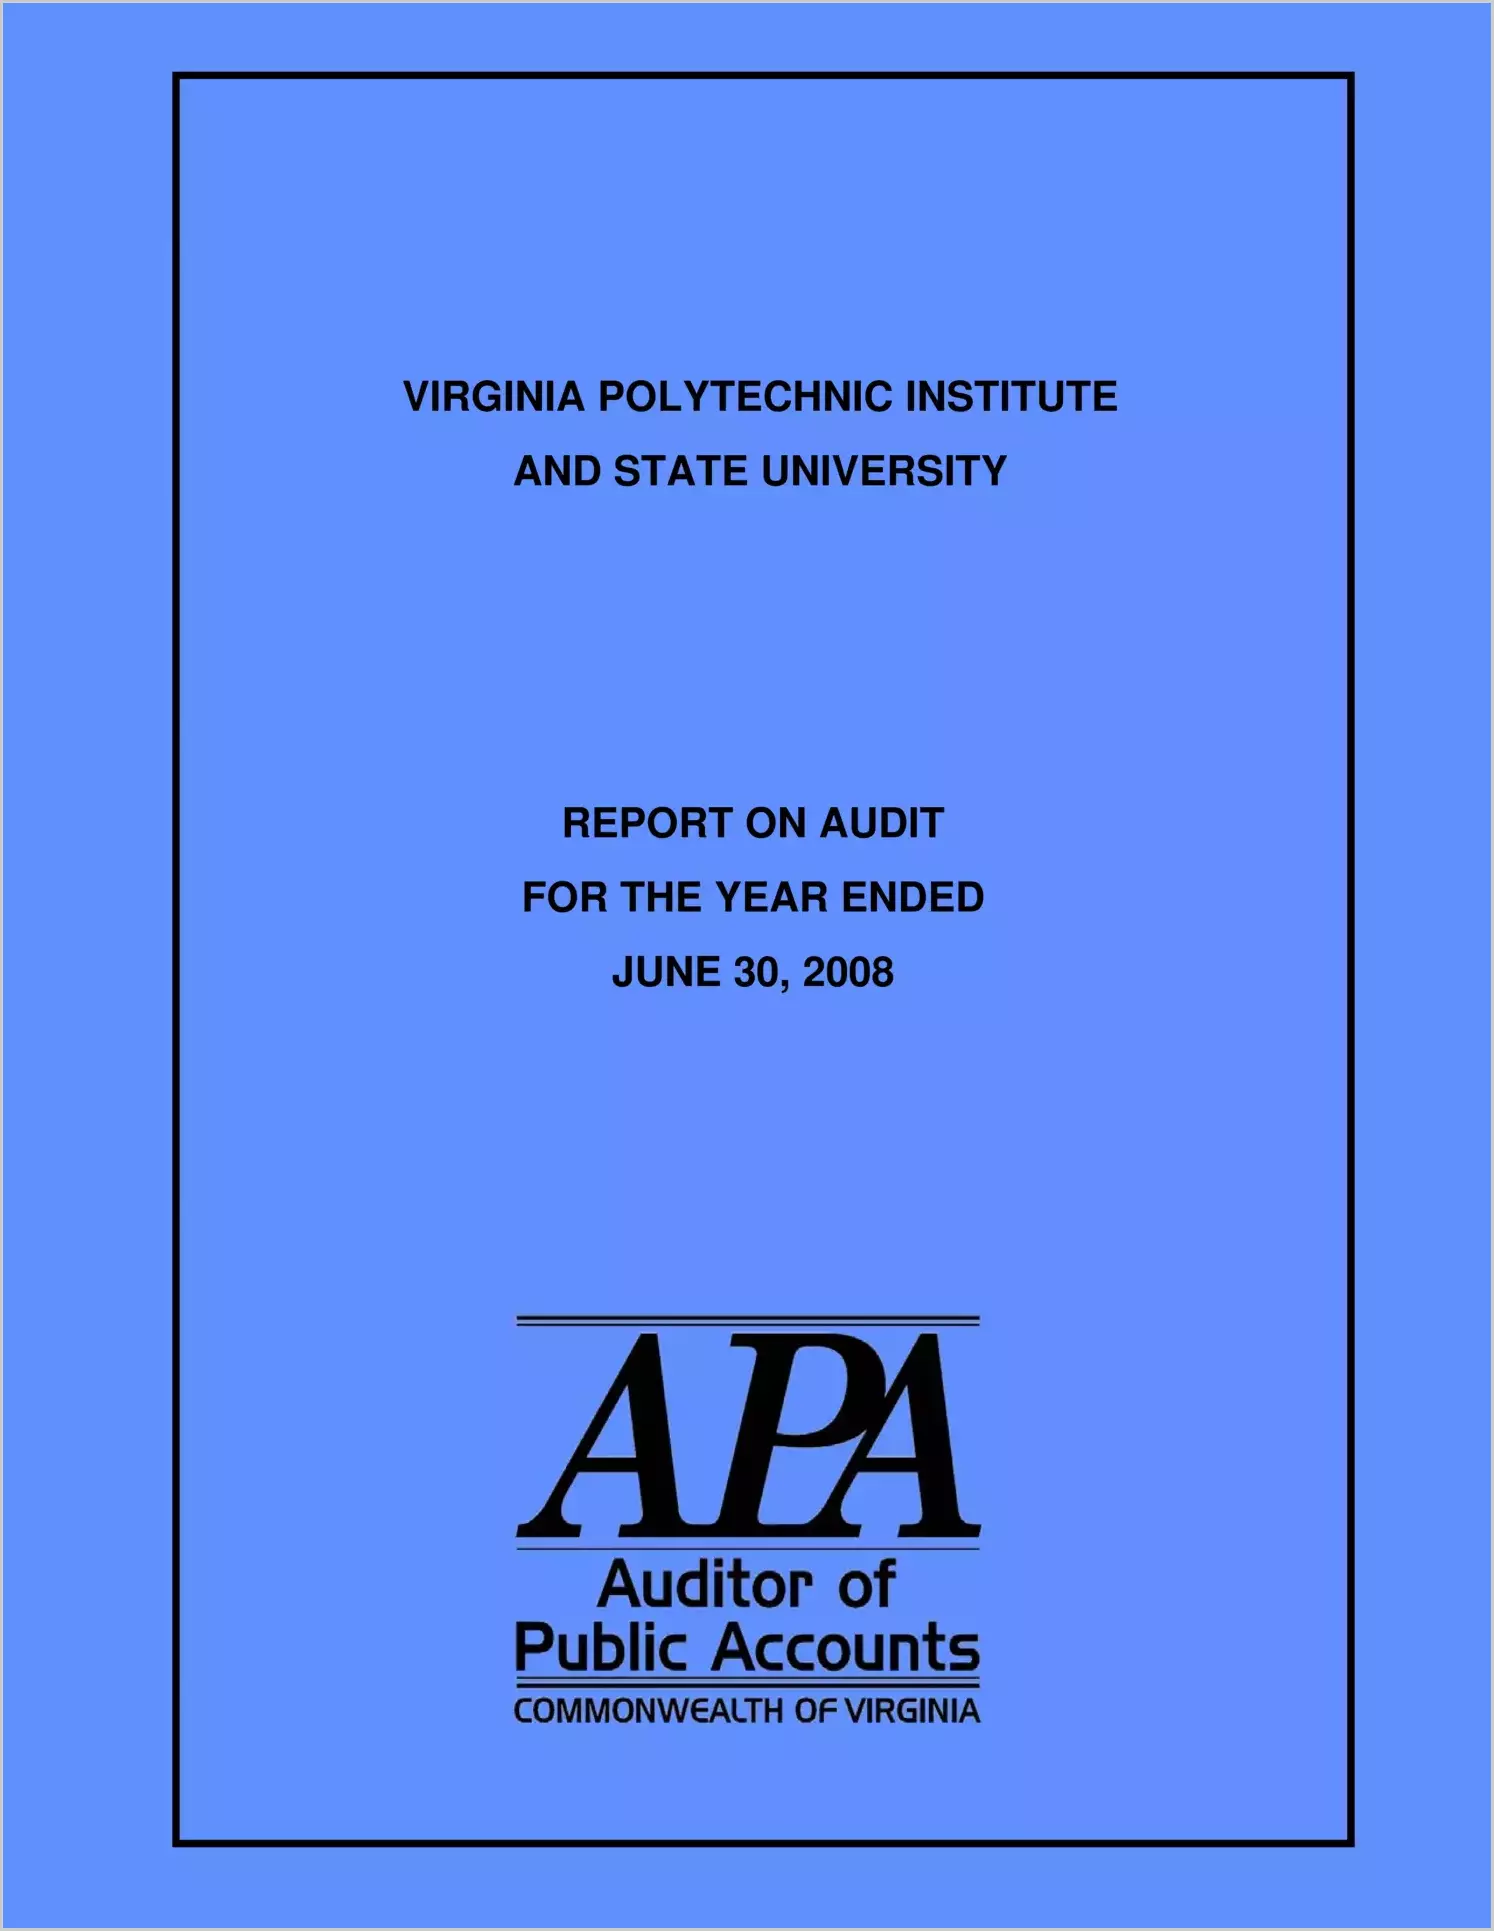 Virginia Polytechnic Institute and State University for the year ended June 30, 2008